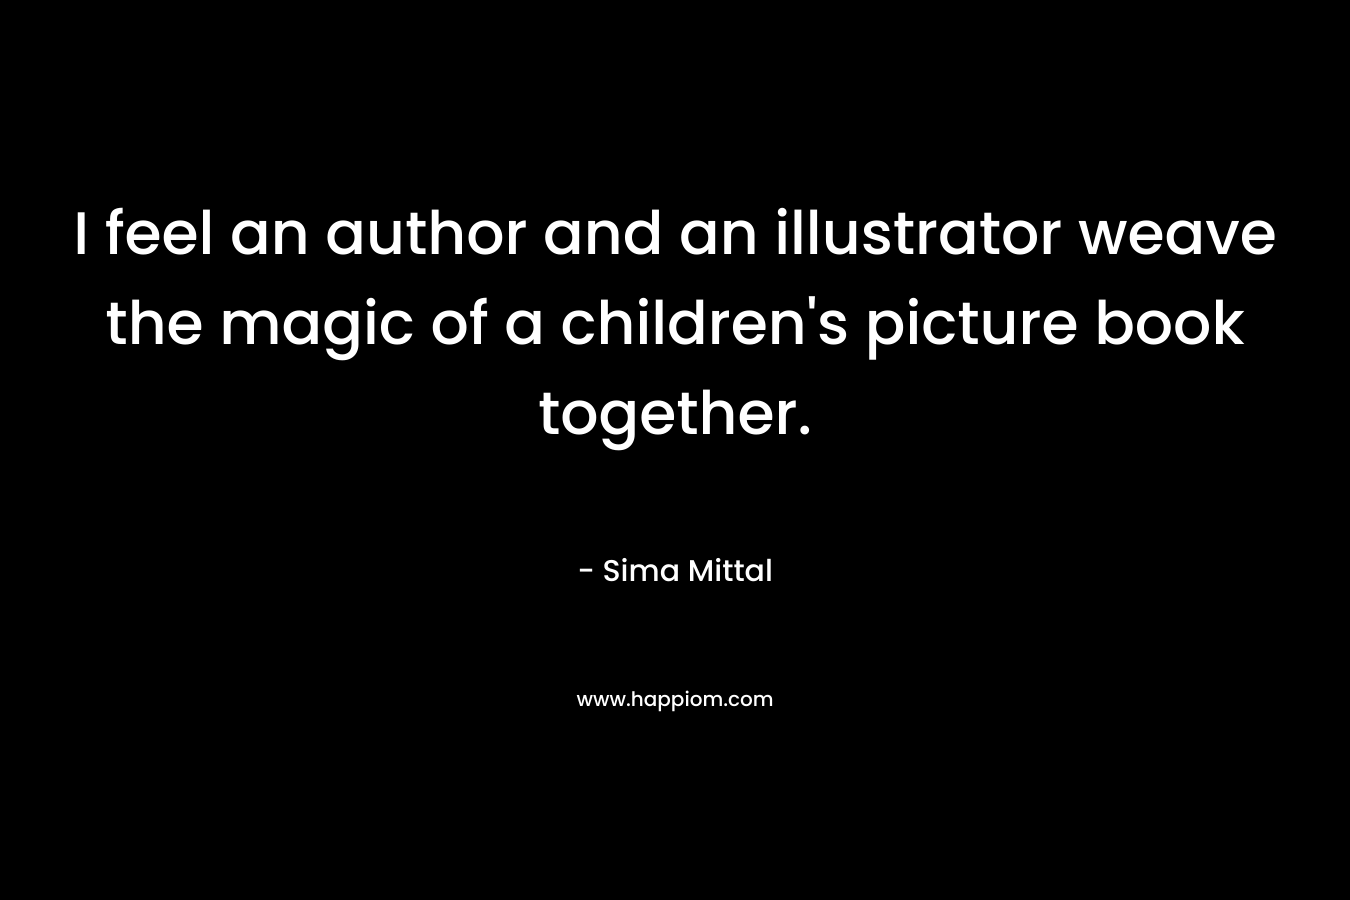 I feel an author and an illustrator weave the magic of a children’s picture book together. – Sima Mittal